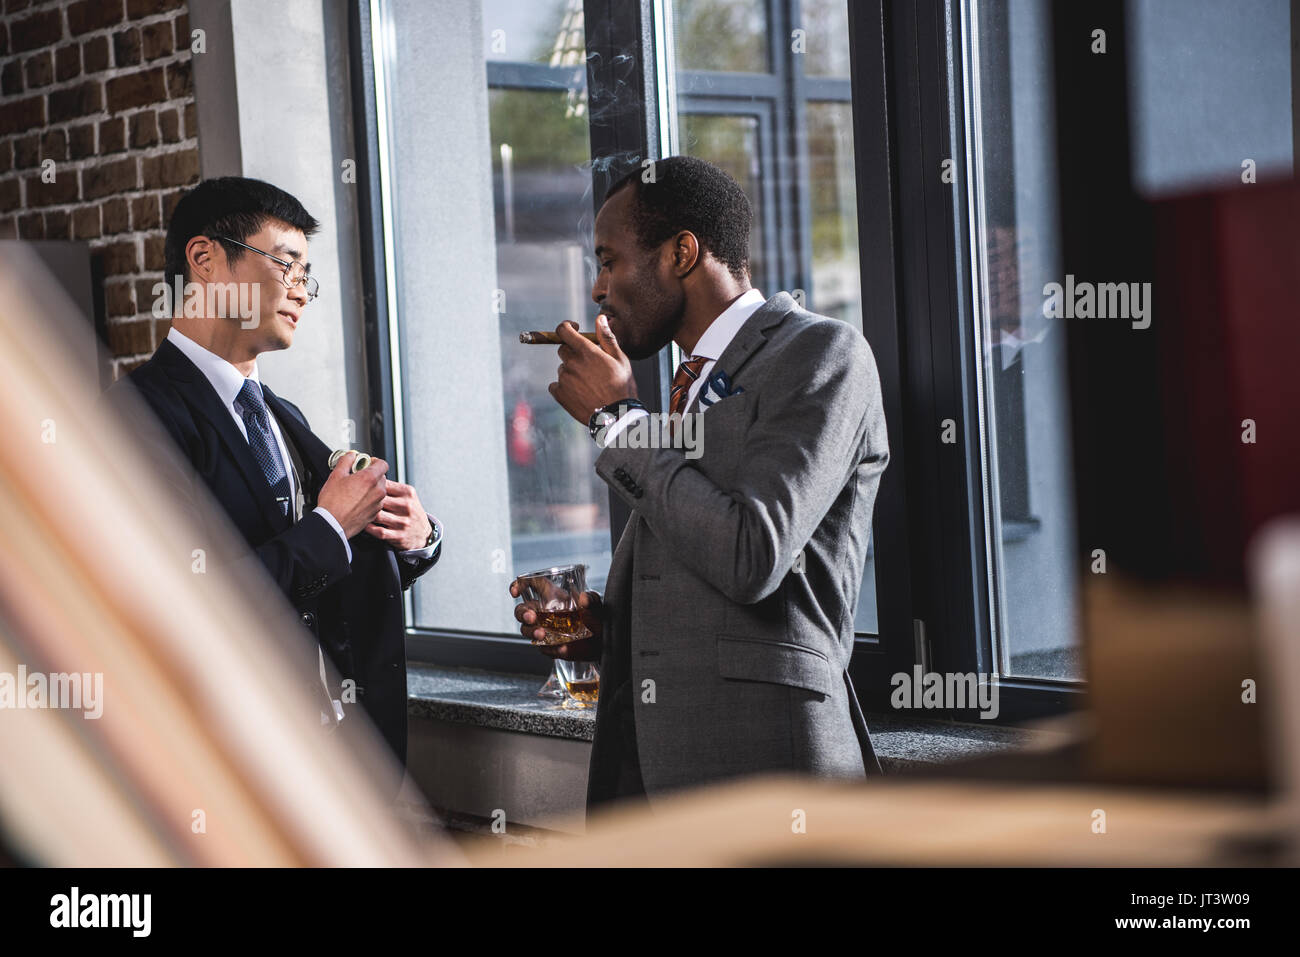 Confident businessman drinking alcohol beverage and smoking cigar while colleague hiding money into suit pocket, business team meeting Stock Photo